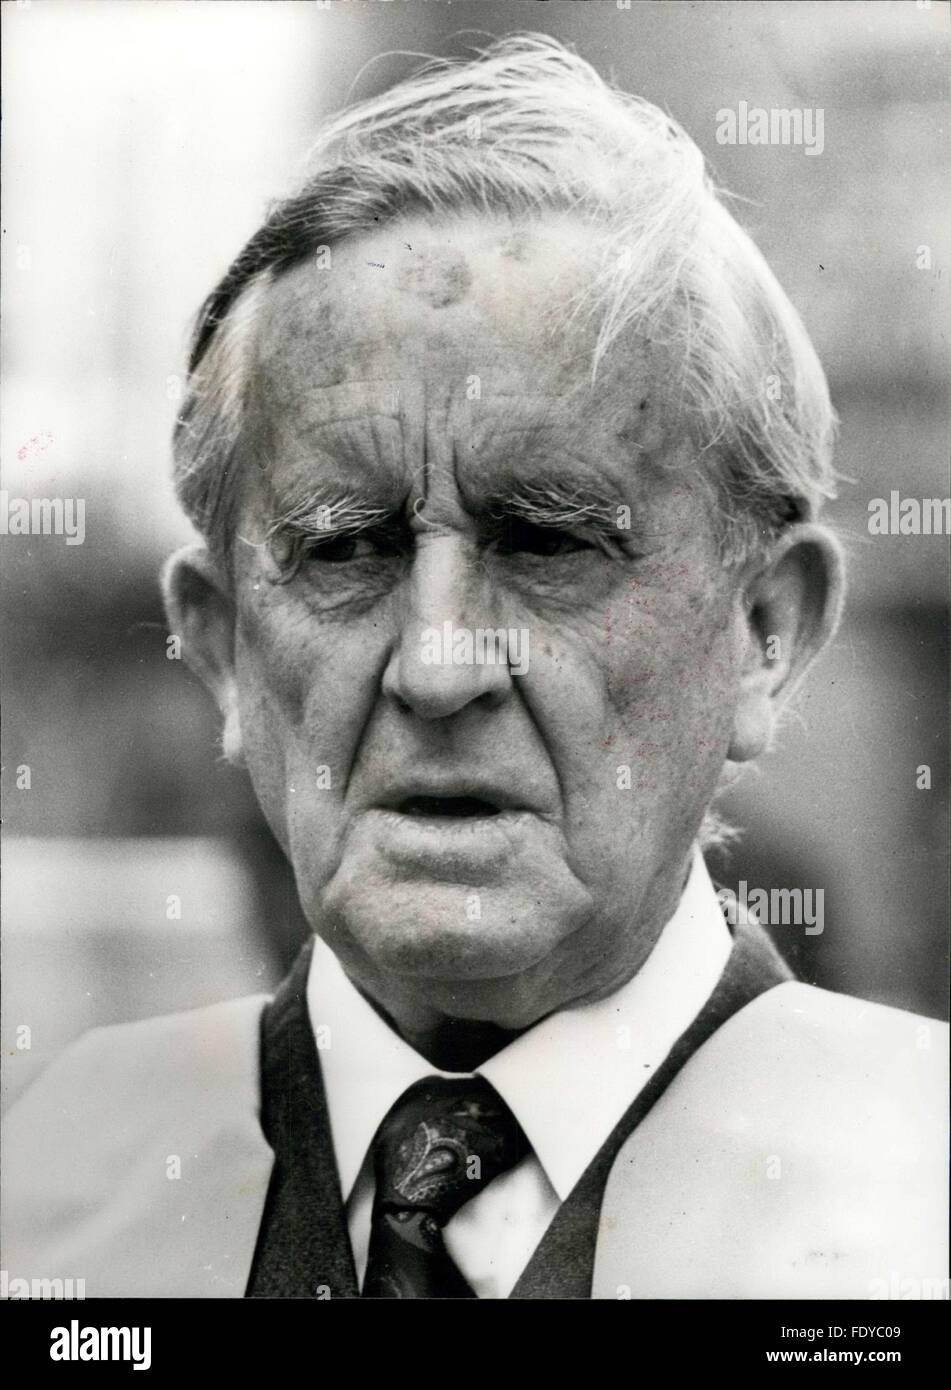 1968 - Professor J.R.R. Tolkien Author of the Lord of the Rings. © Keystone Pictures USA/ZUMAPRESS.com/Alamy Live News Stock Photo